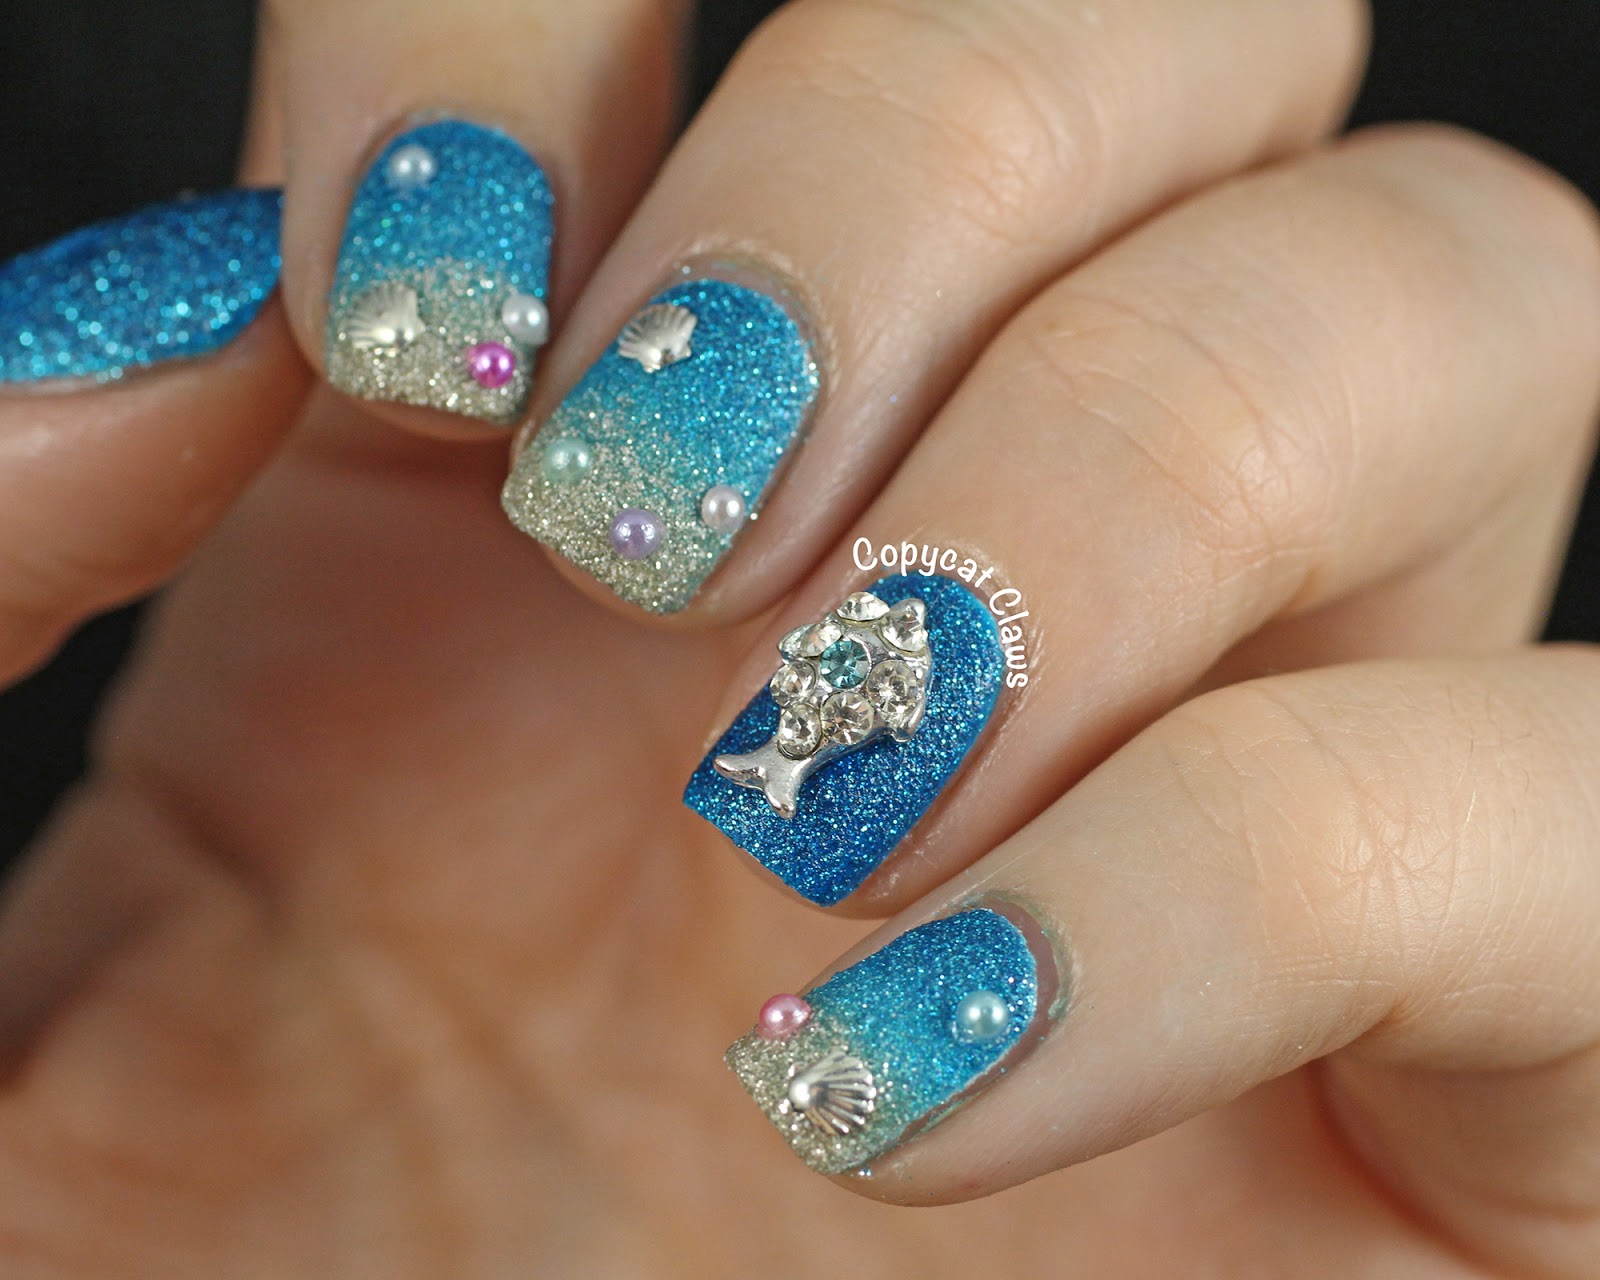 Beach-Themed Nail Designs for Pedicures - wide 3